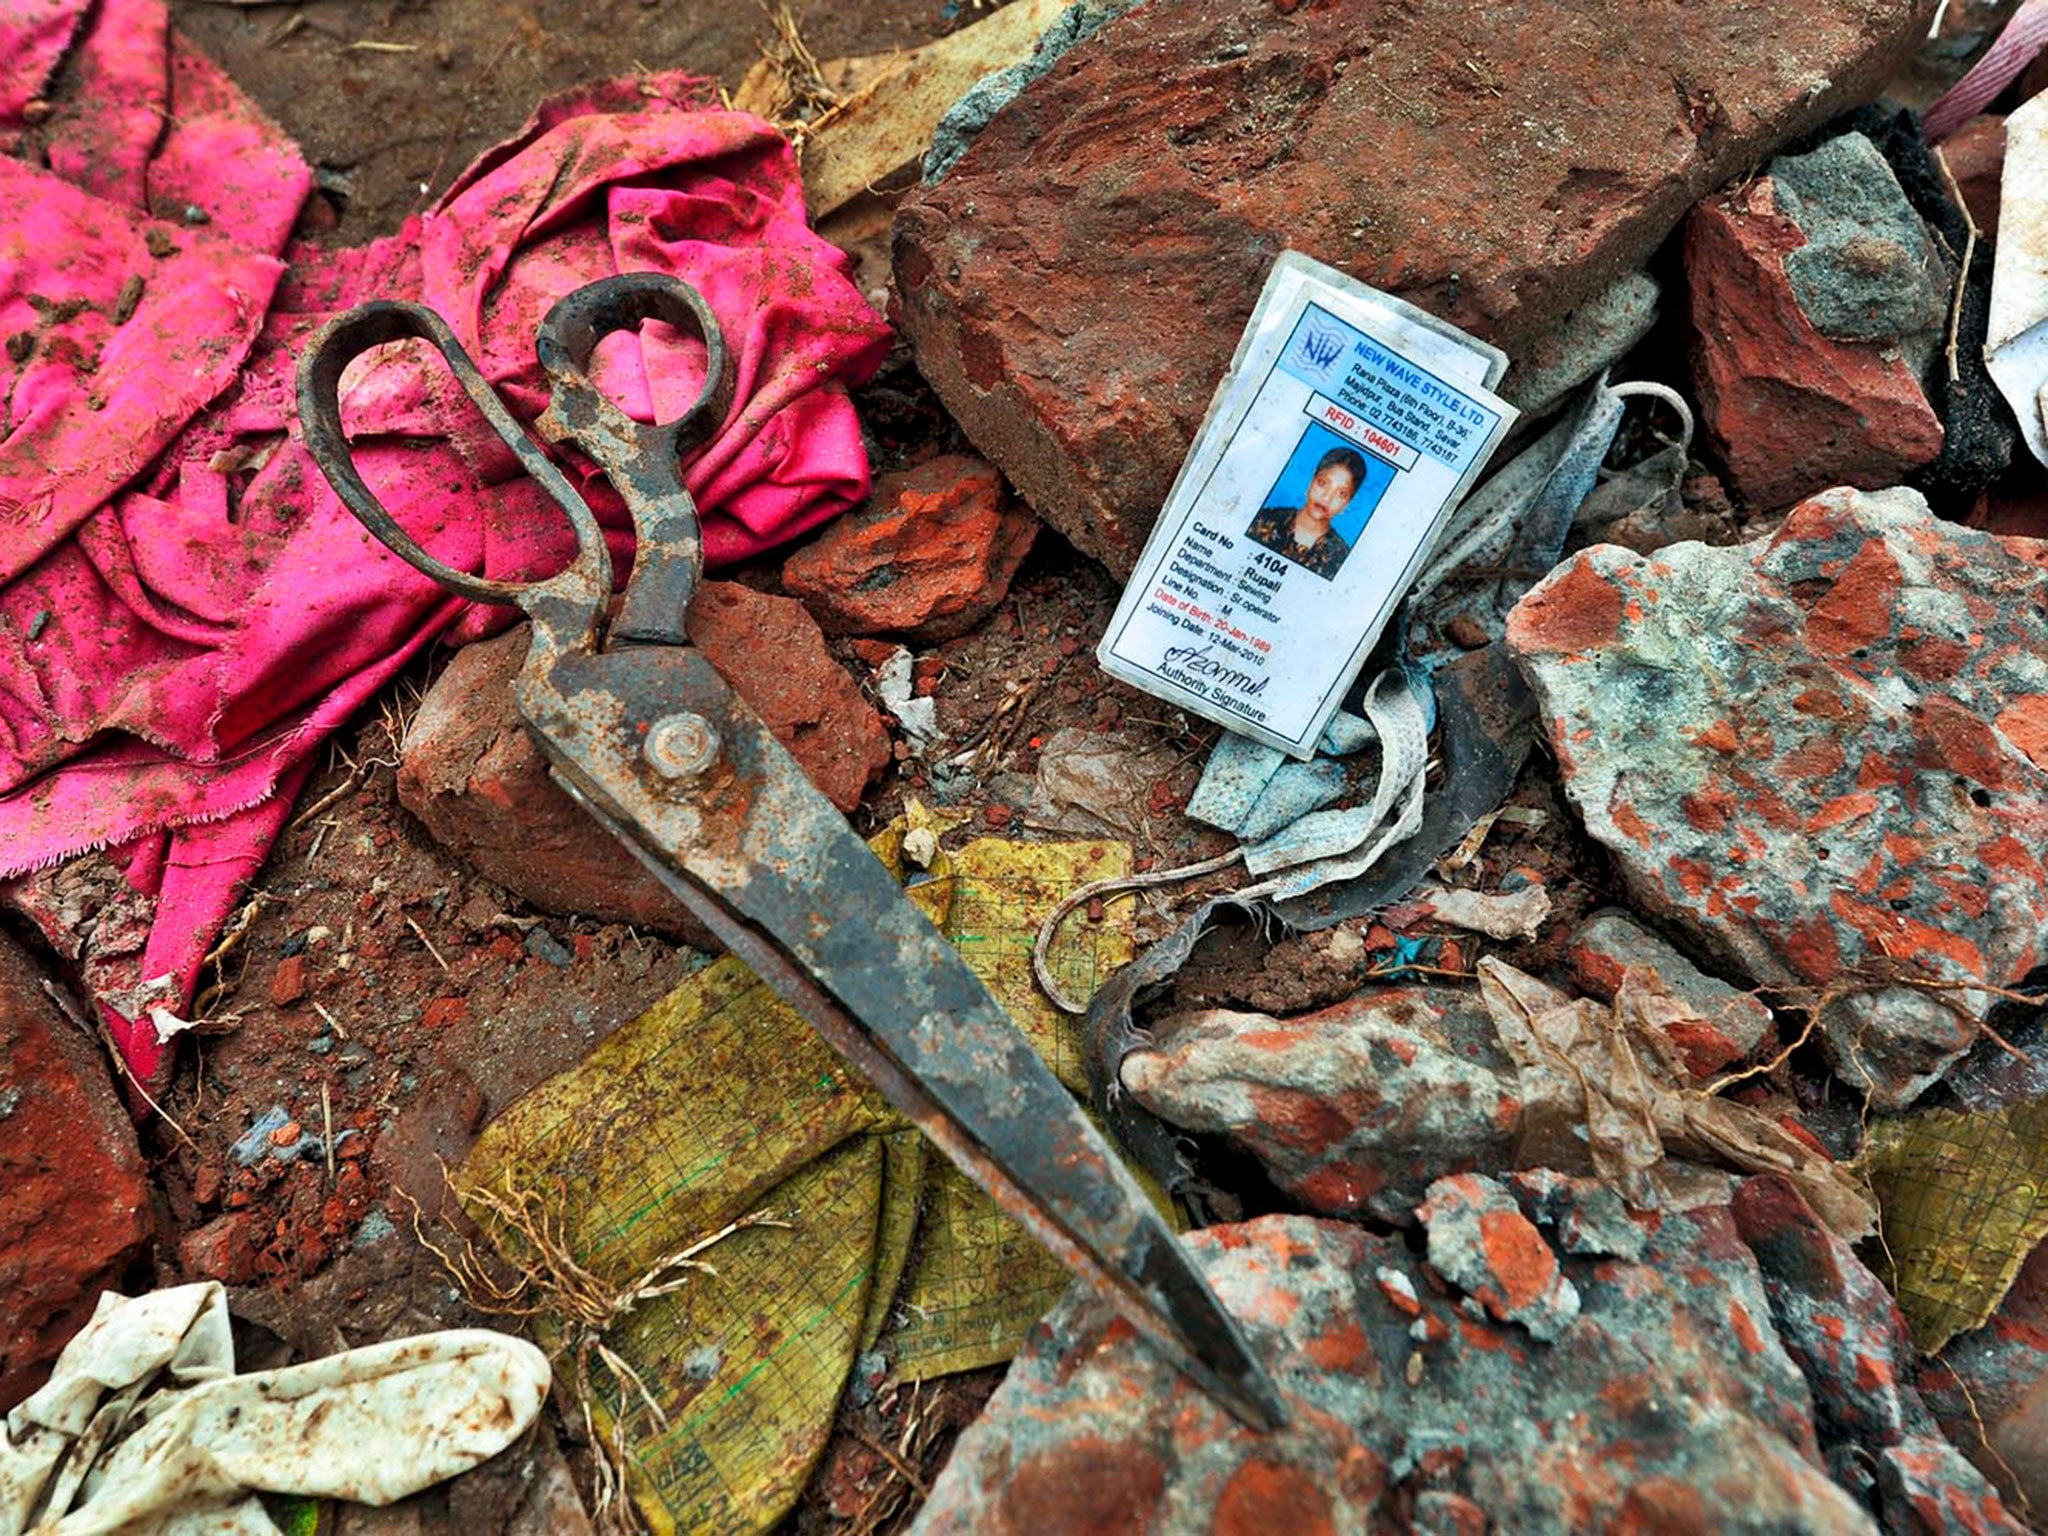 The ID card of a worker and a pair of scissors left abandoned in the site of the collapsed factory building in Savar © Khorshed Alam Rinku